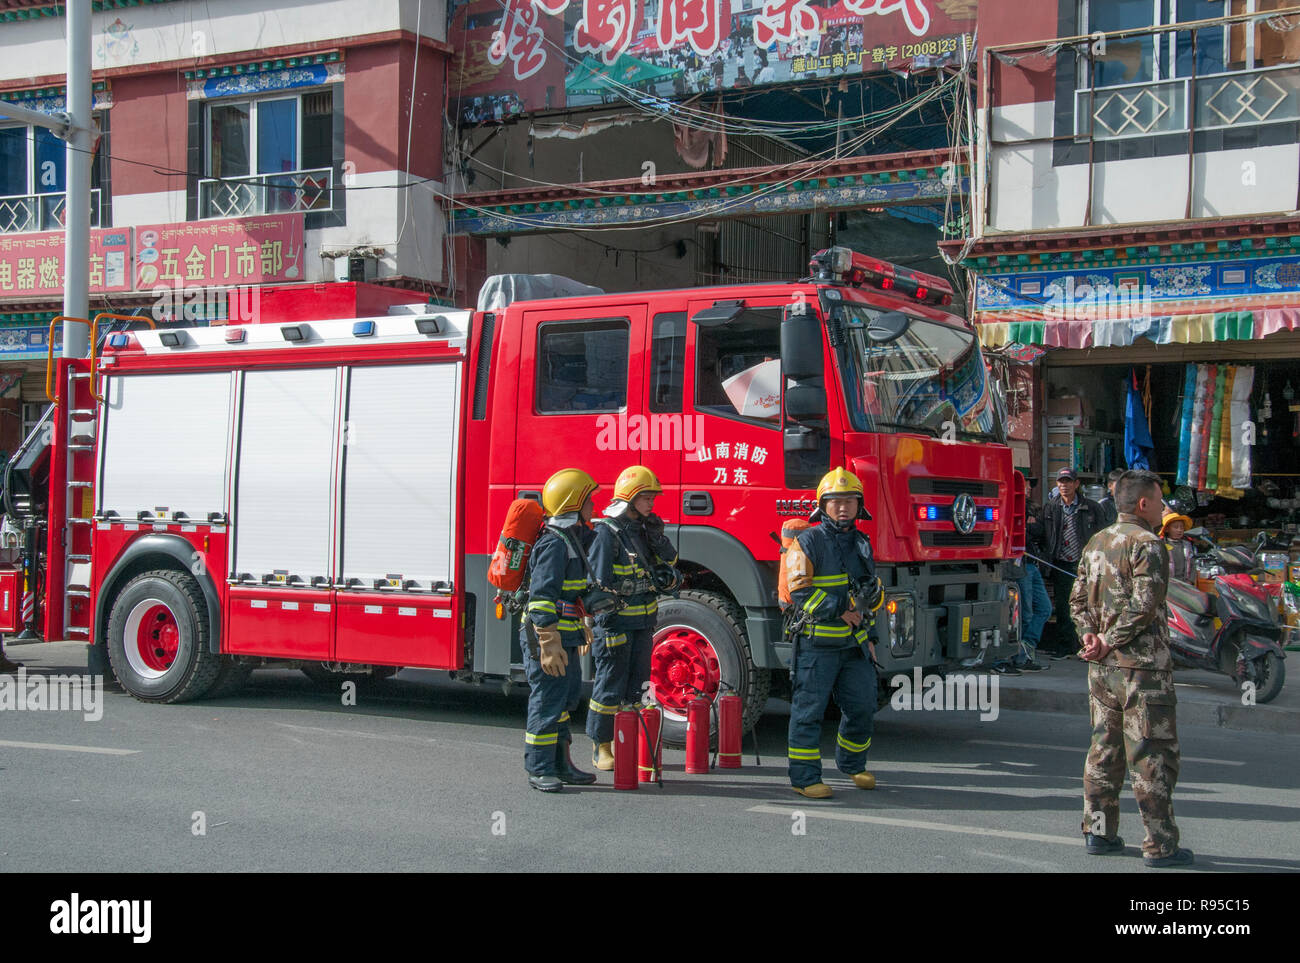 Fire truck call-out in a city street in Tsetang, Tibet, China Stock Photo